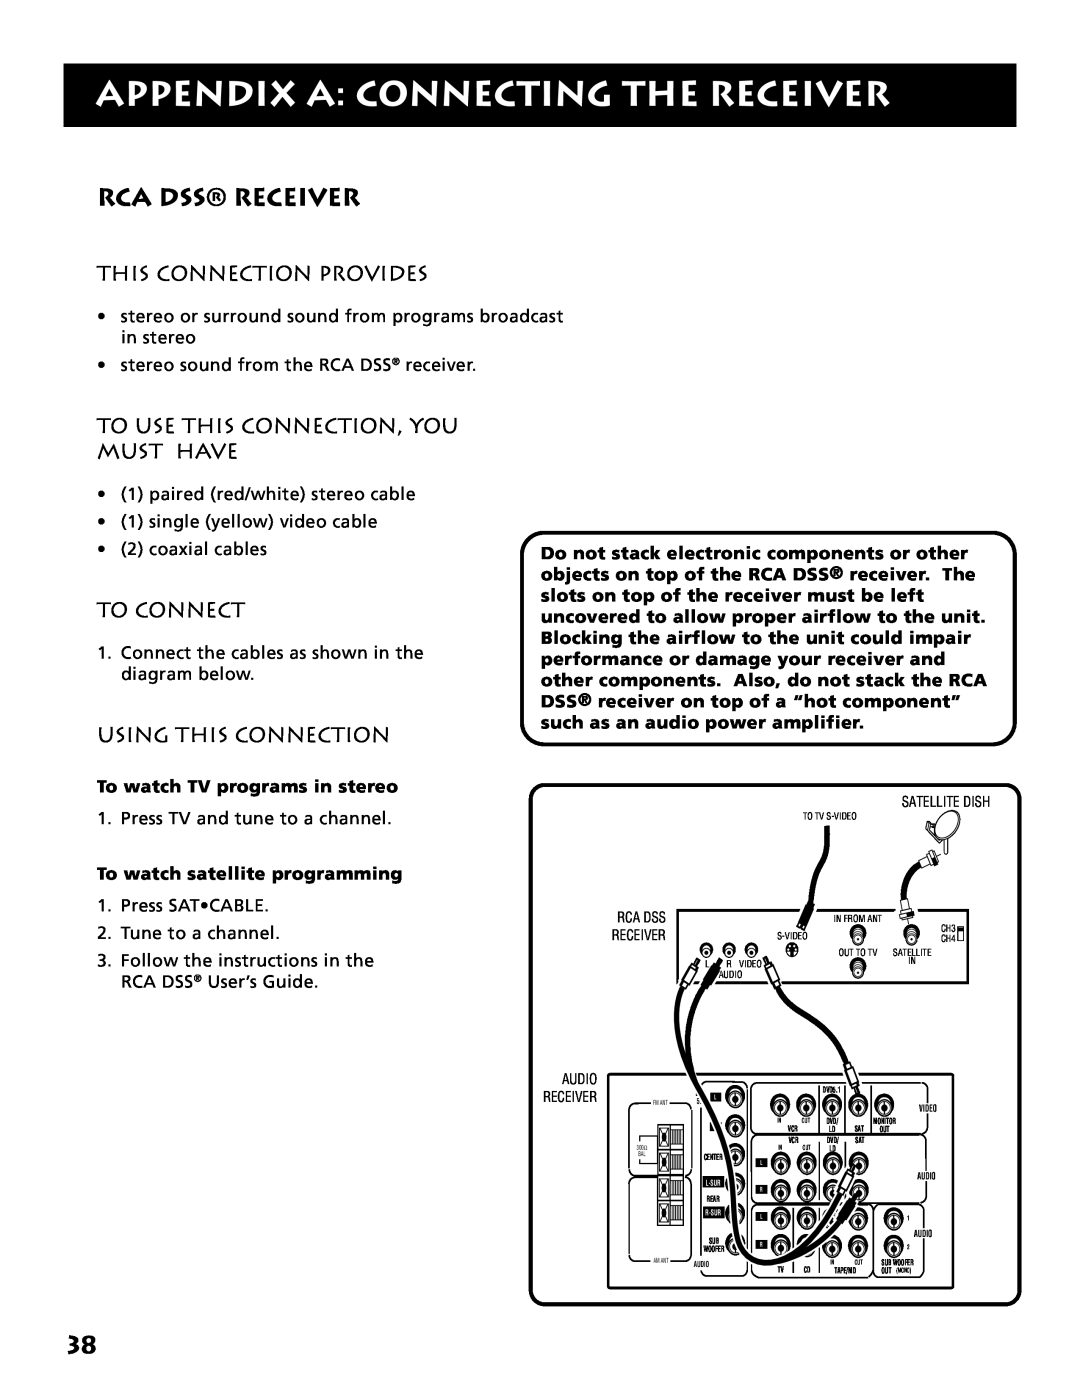 Electrohome RV-3798 manual Rca Dss Receiver, To Use This Connection, You Must Have, Appendix A: Connecting The Receiver 